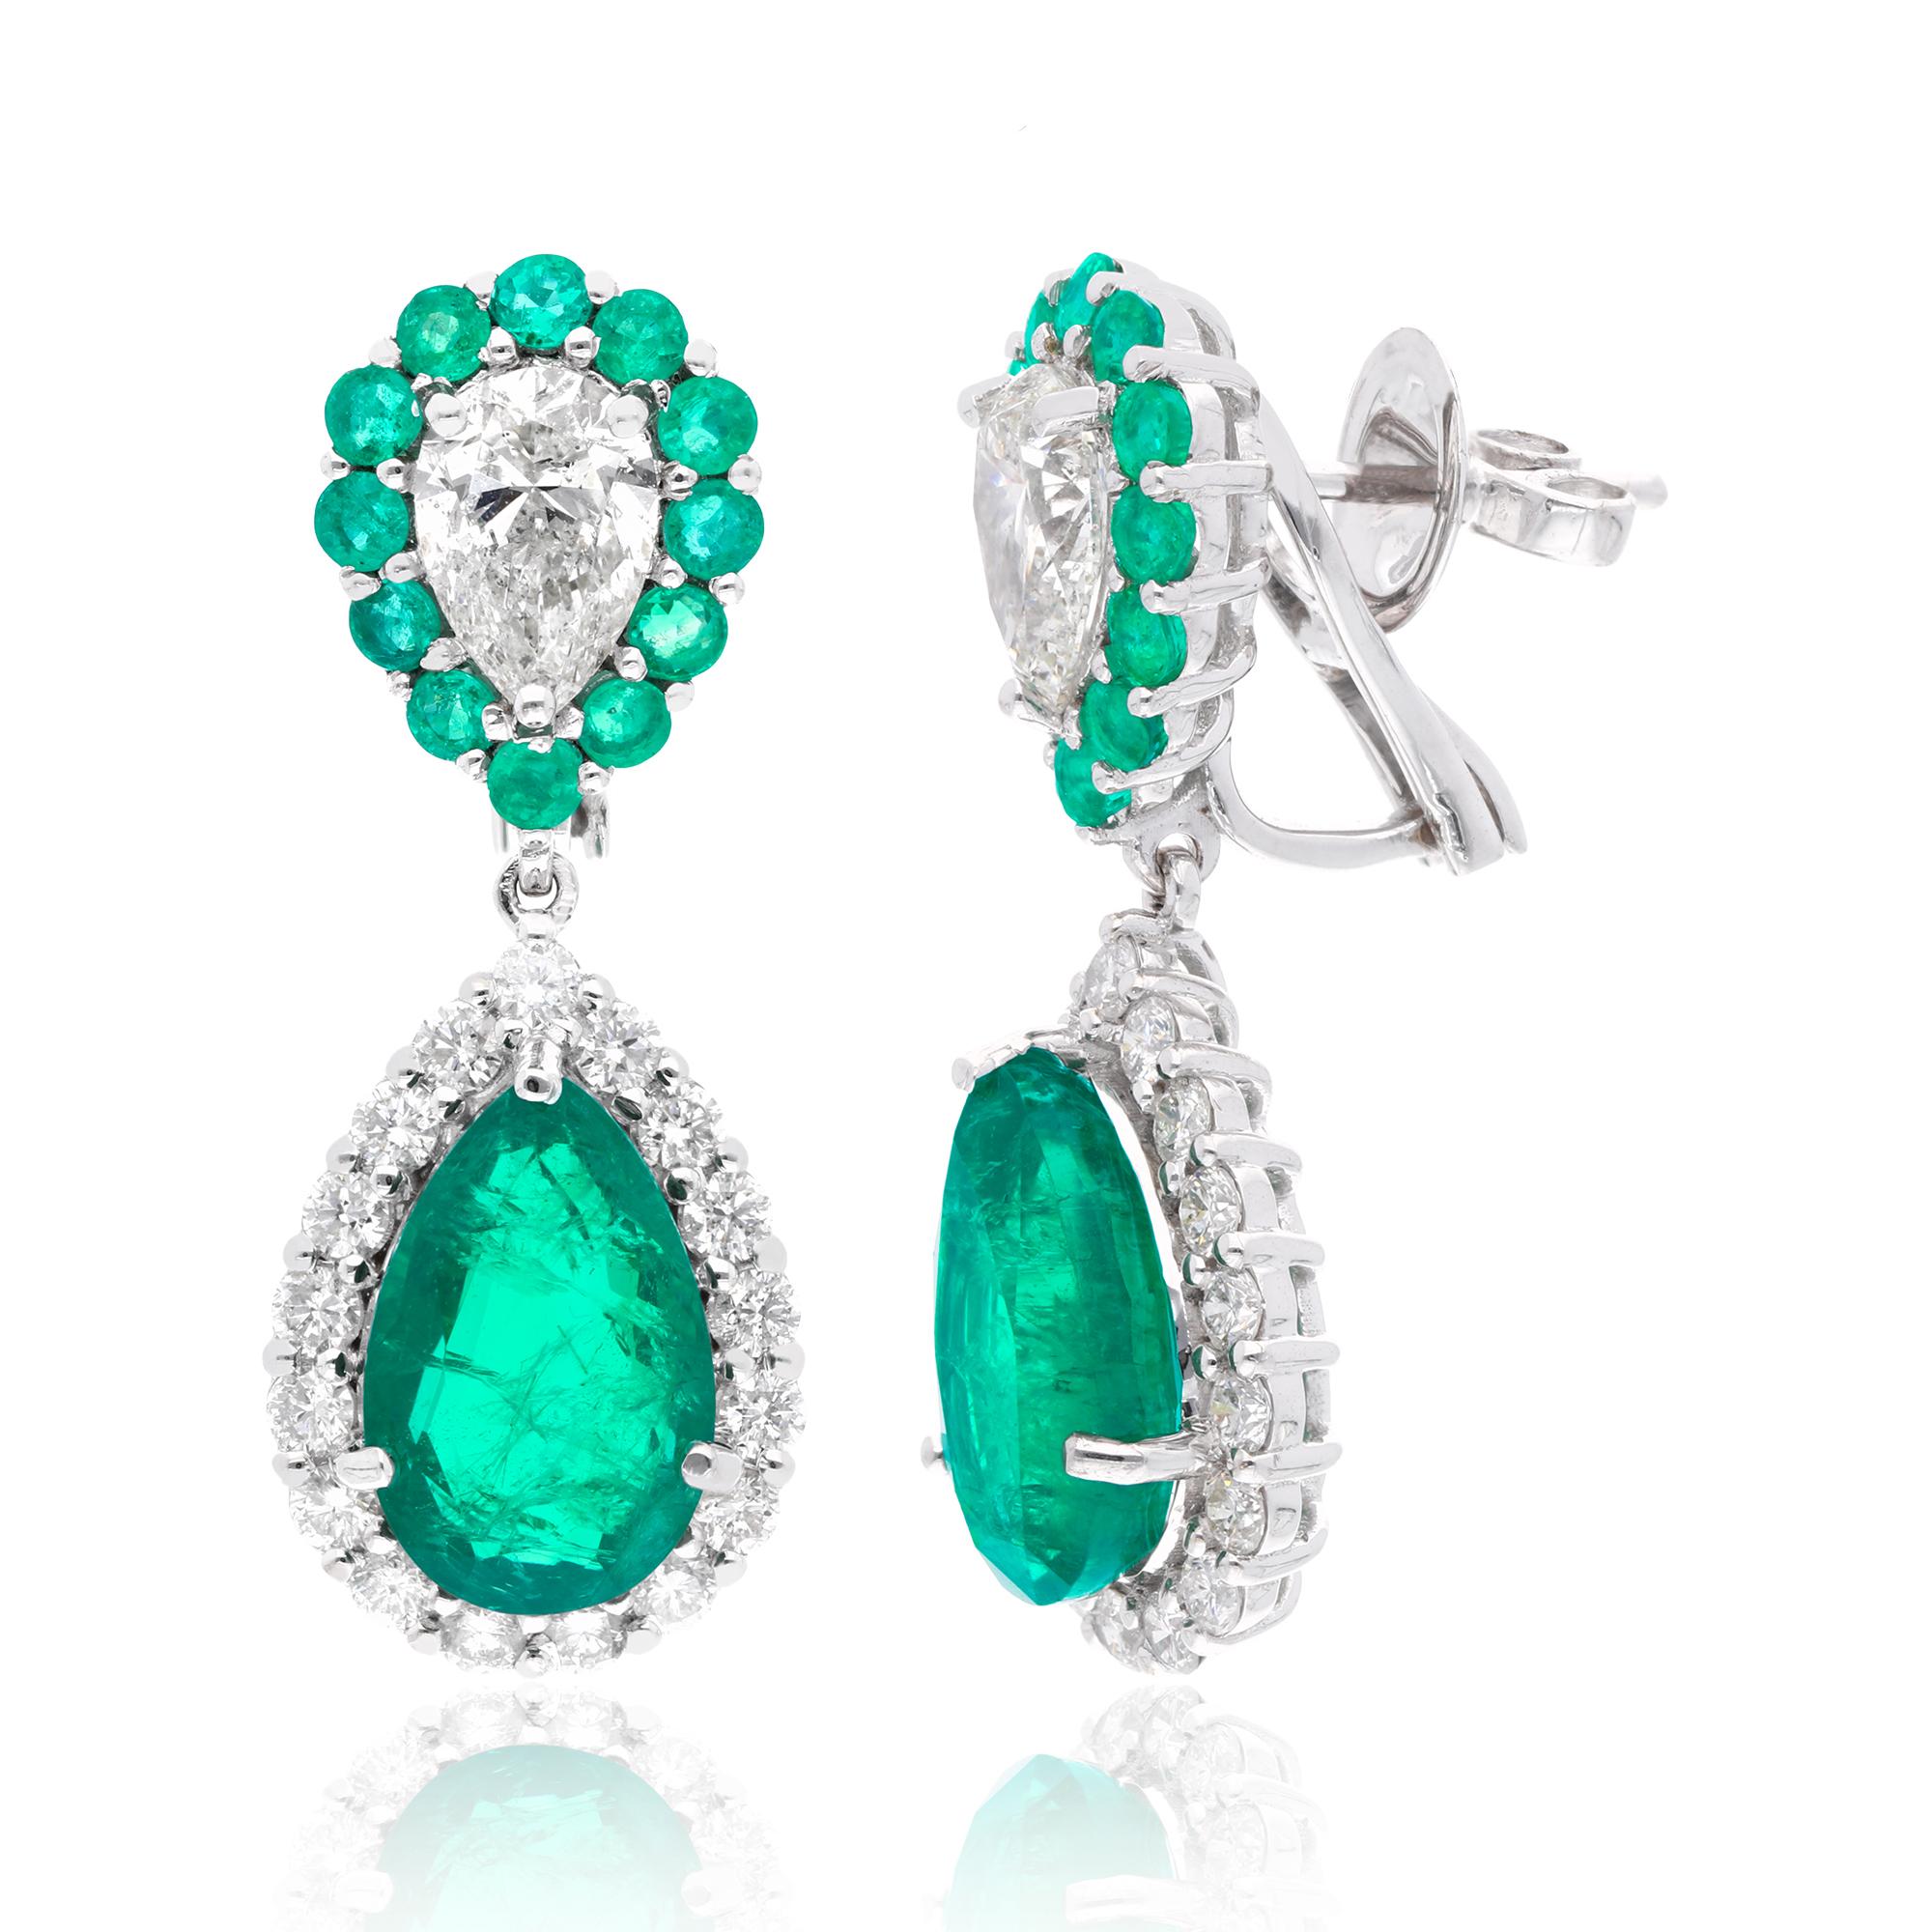 Item Code :- SEE-12634 (14k)
Gross Wt. :- 9.76 gm
14k Solid White Gold Wt. :- 7.48 gm
Natural Diamond Wt. :- 3.28 Ct. ( AVERAGE DIAMOND CLARITY SI1-SI2 & COLOR H-I )
Emerald Wt. :- 8.14 Ct.
Earrings Size :- 32 mm approx.

✦